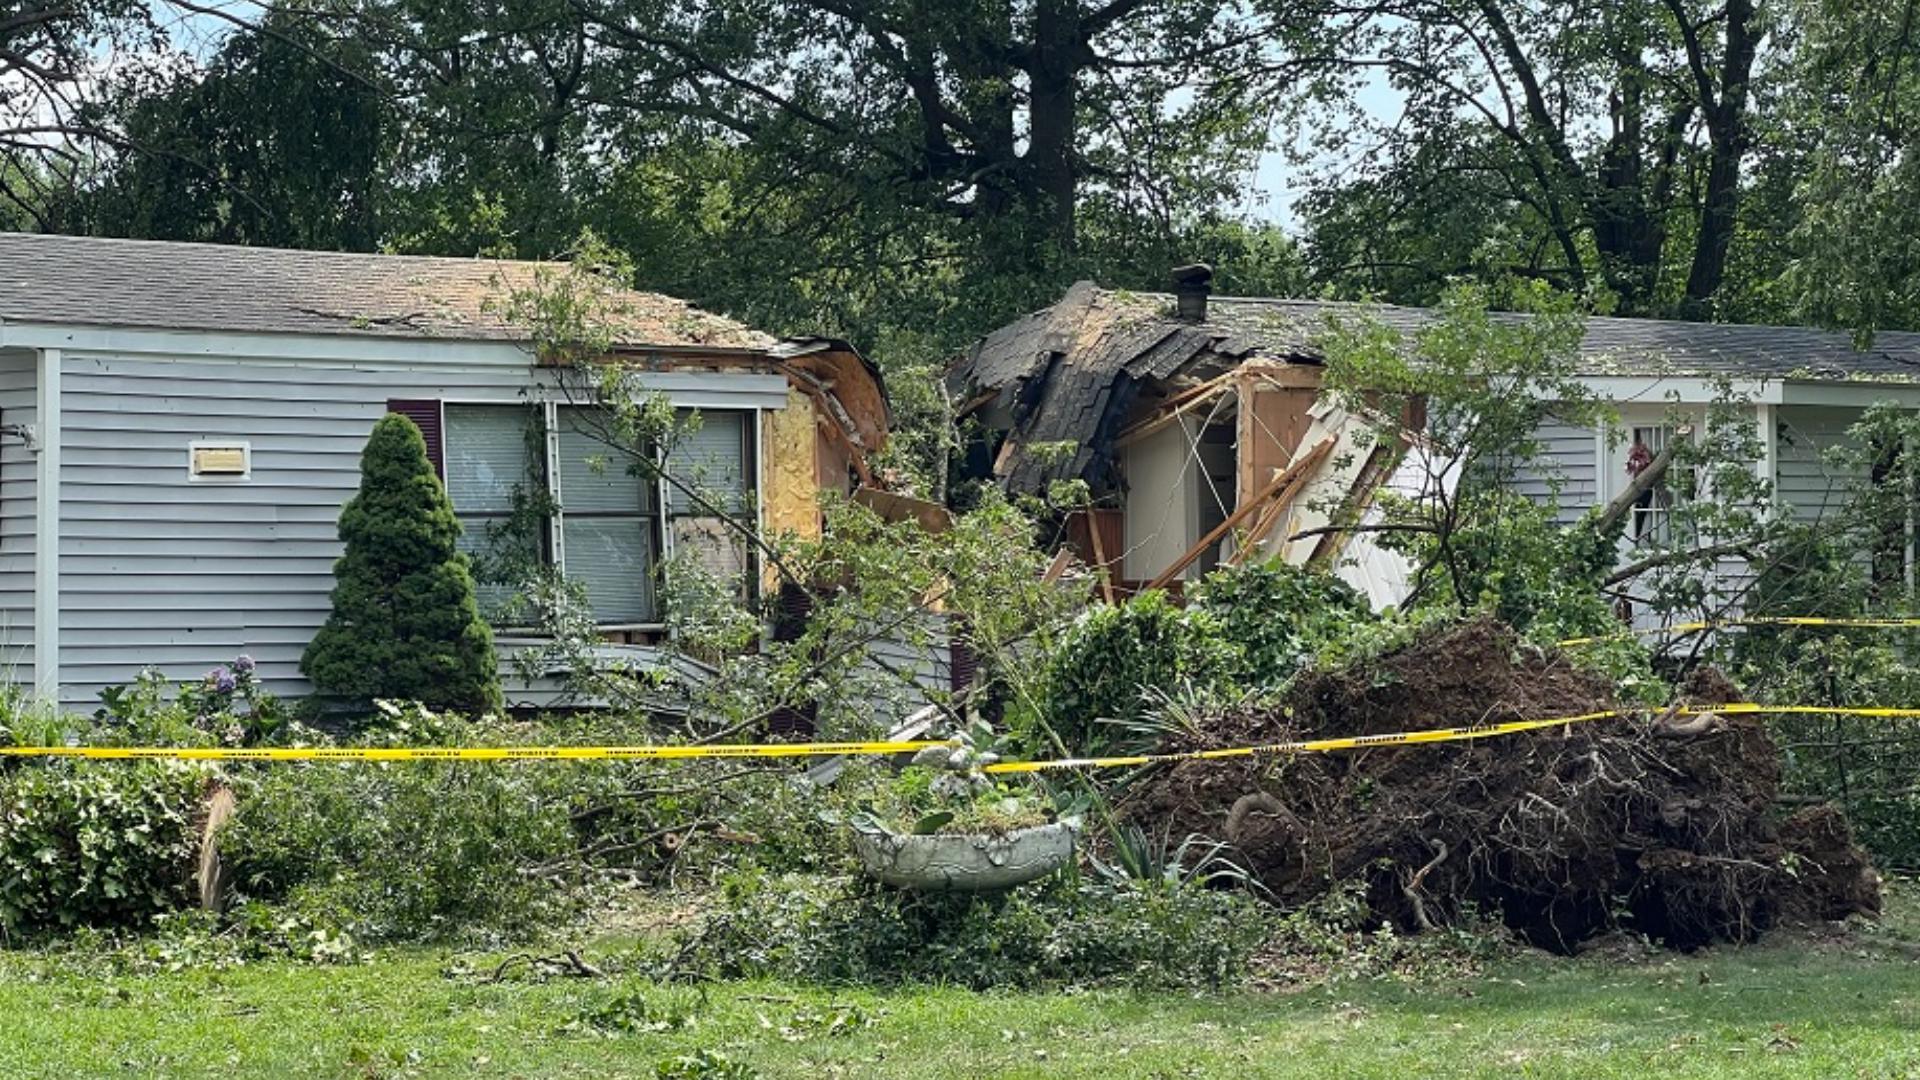 Tuesday night's storm destroyed some homes, while leaving others untouched.